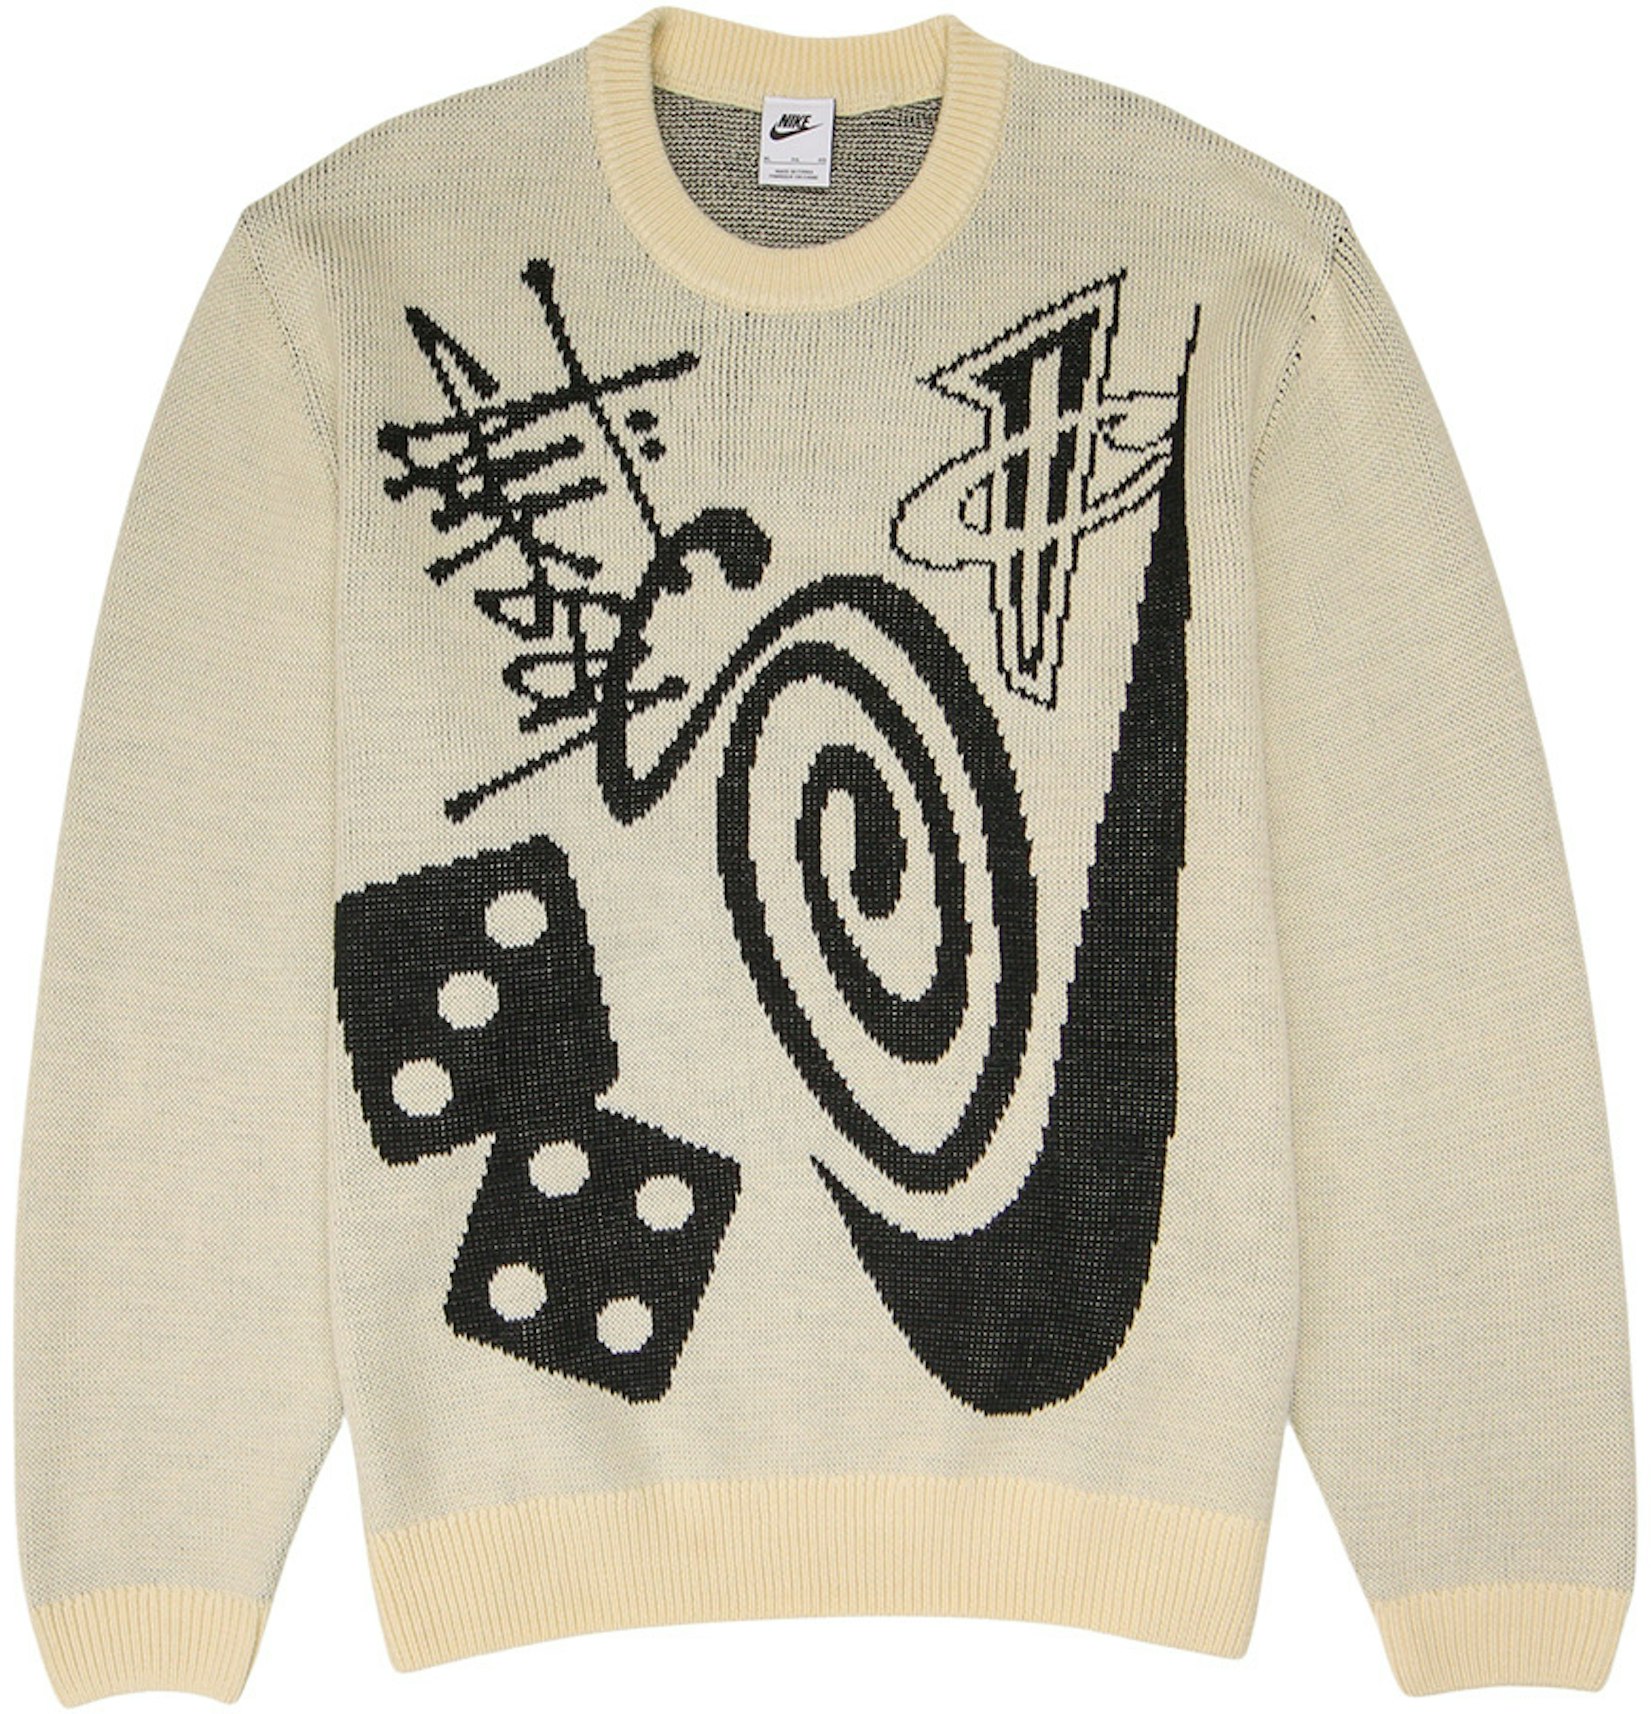 Nominaal Boodschapper calorie Nike x Stussy Knit Sweater Natural - SS23 Men's - US